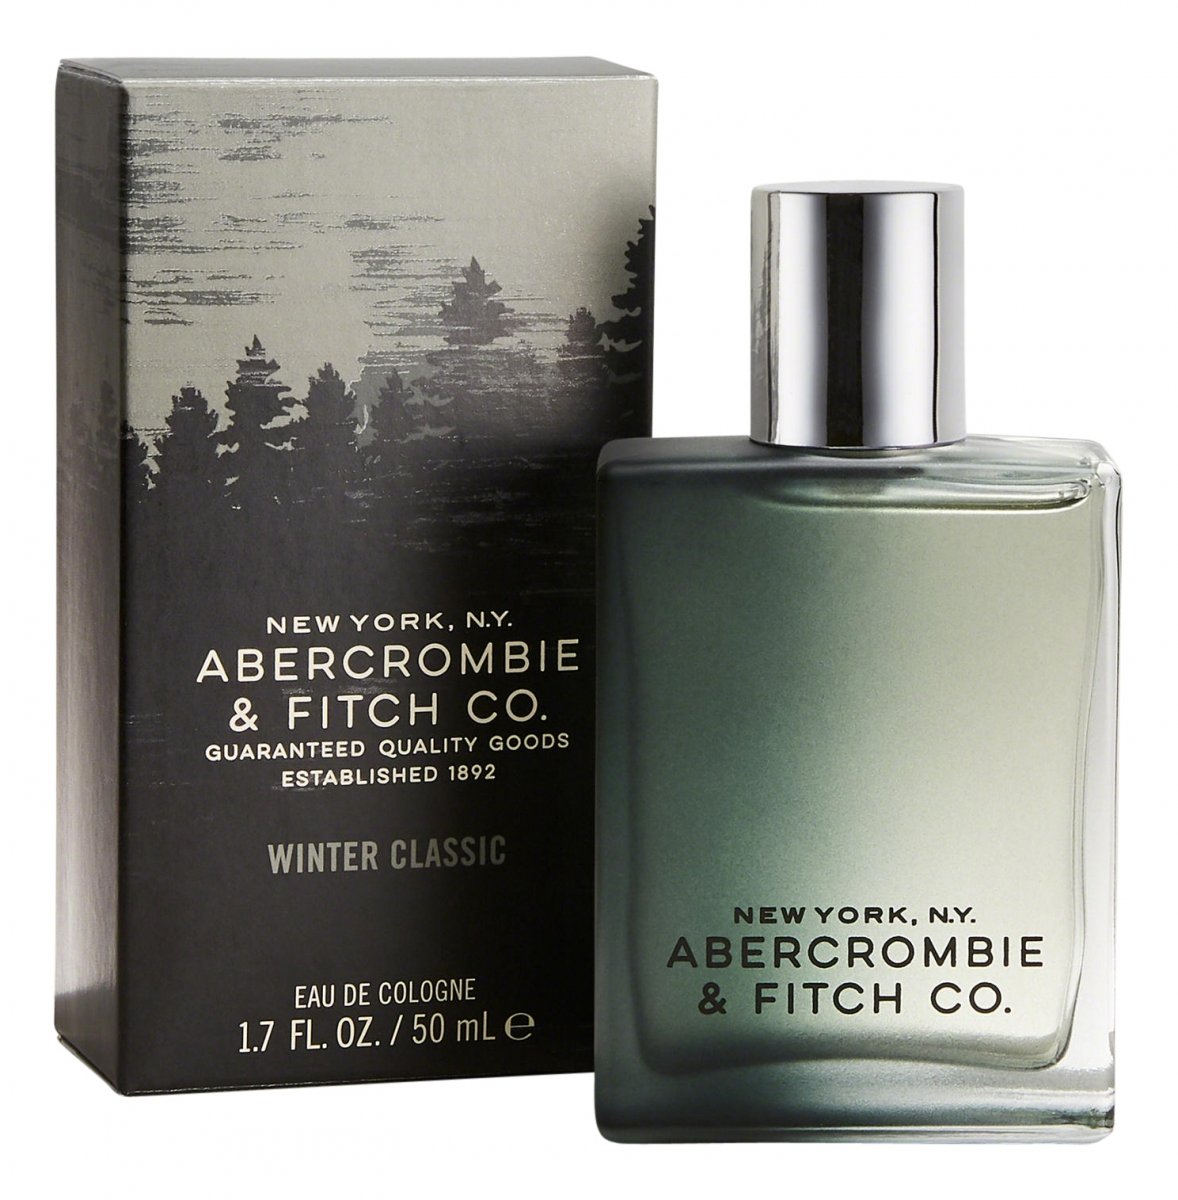 Winter Classic for Men by Abercrombie & Fitch » Reviews & Perfume Facts